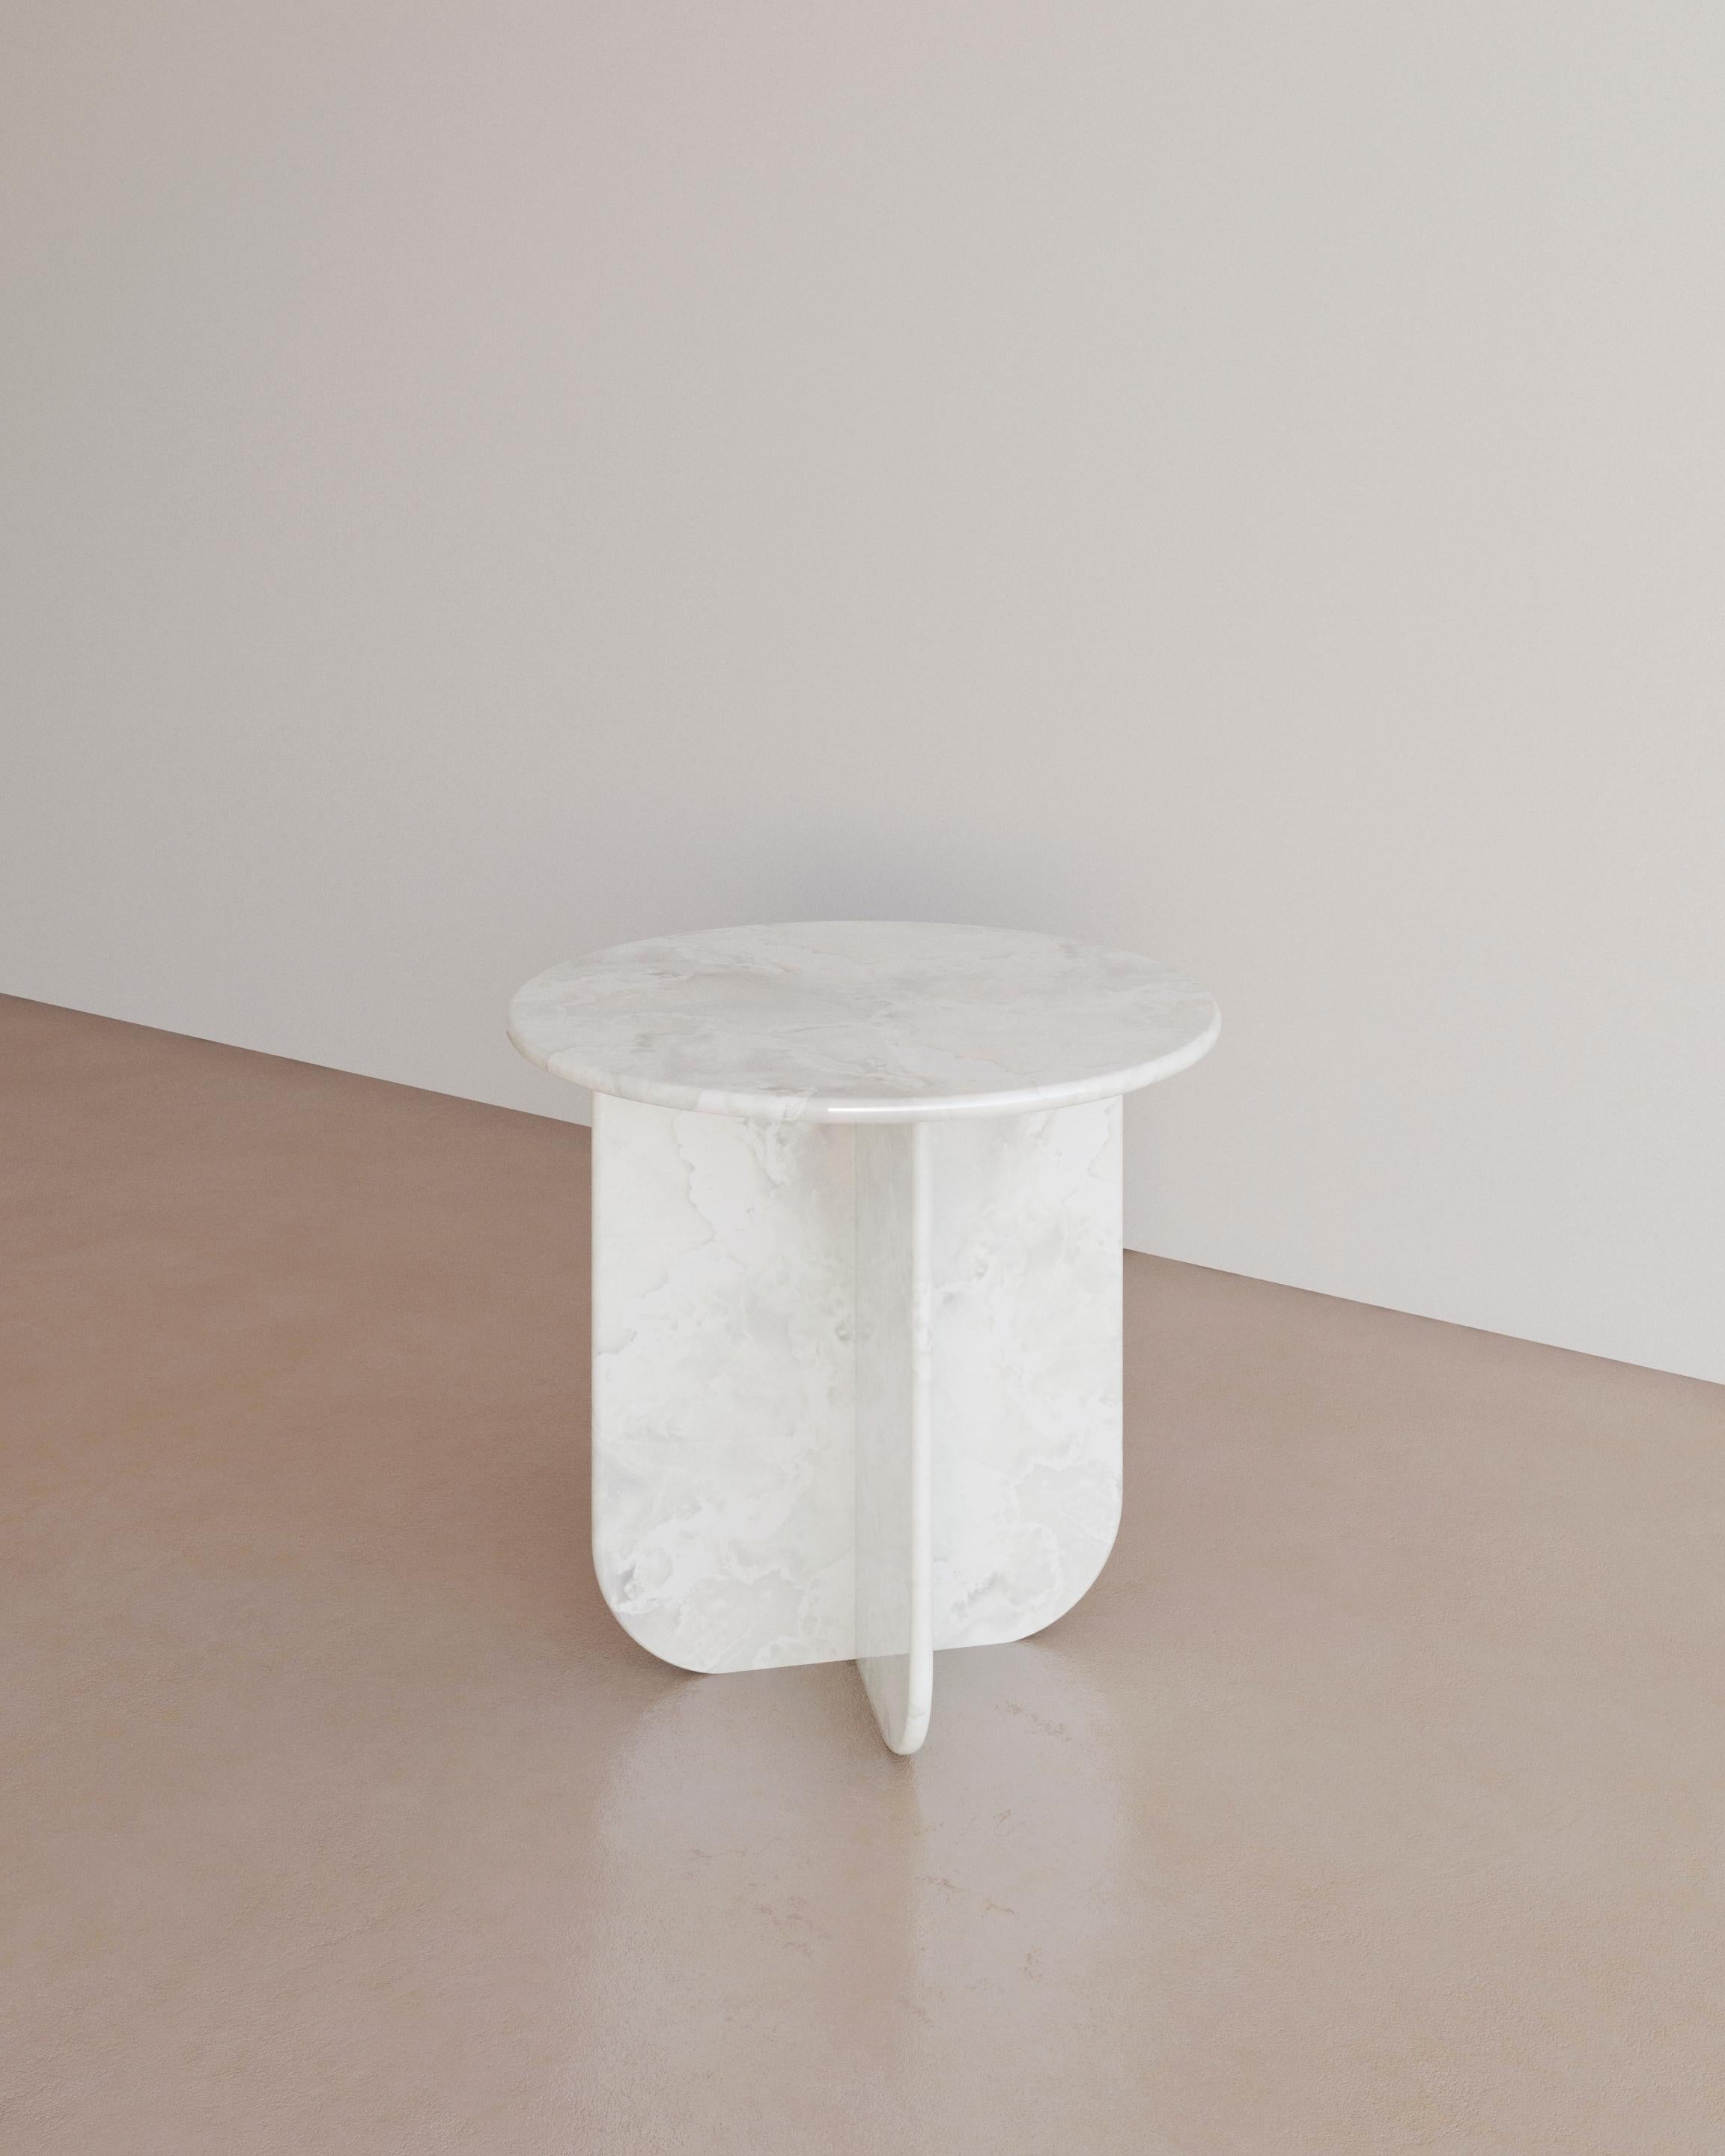 Onyx Viola Ètoile Occasional Table by the Essentialist For Sale